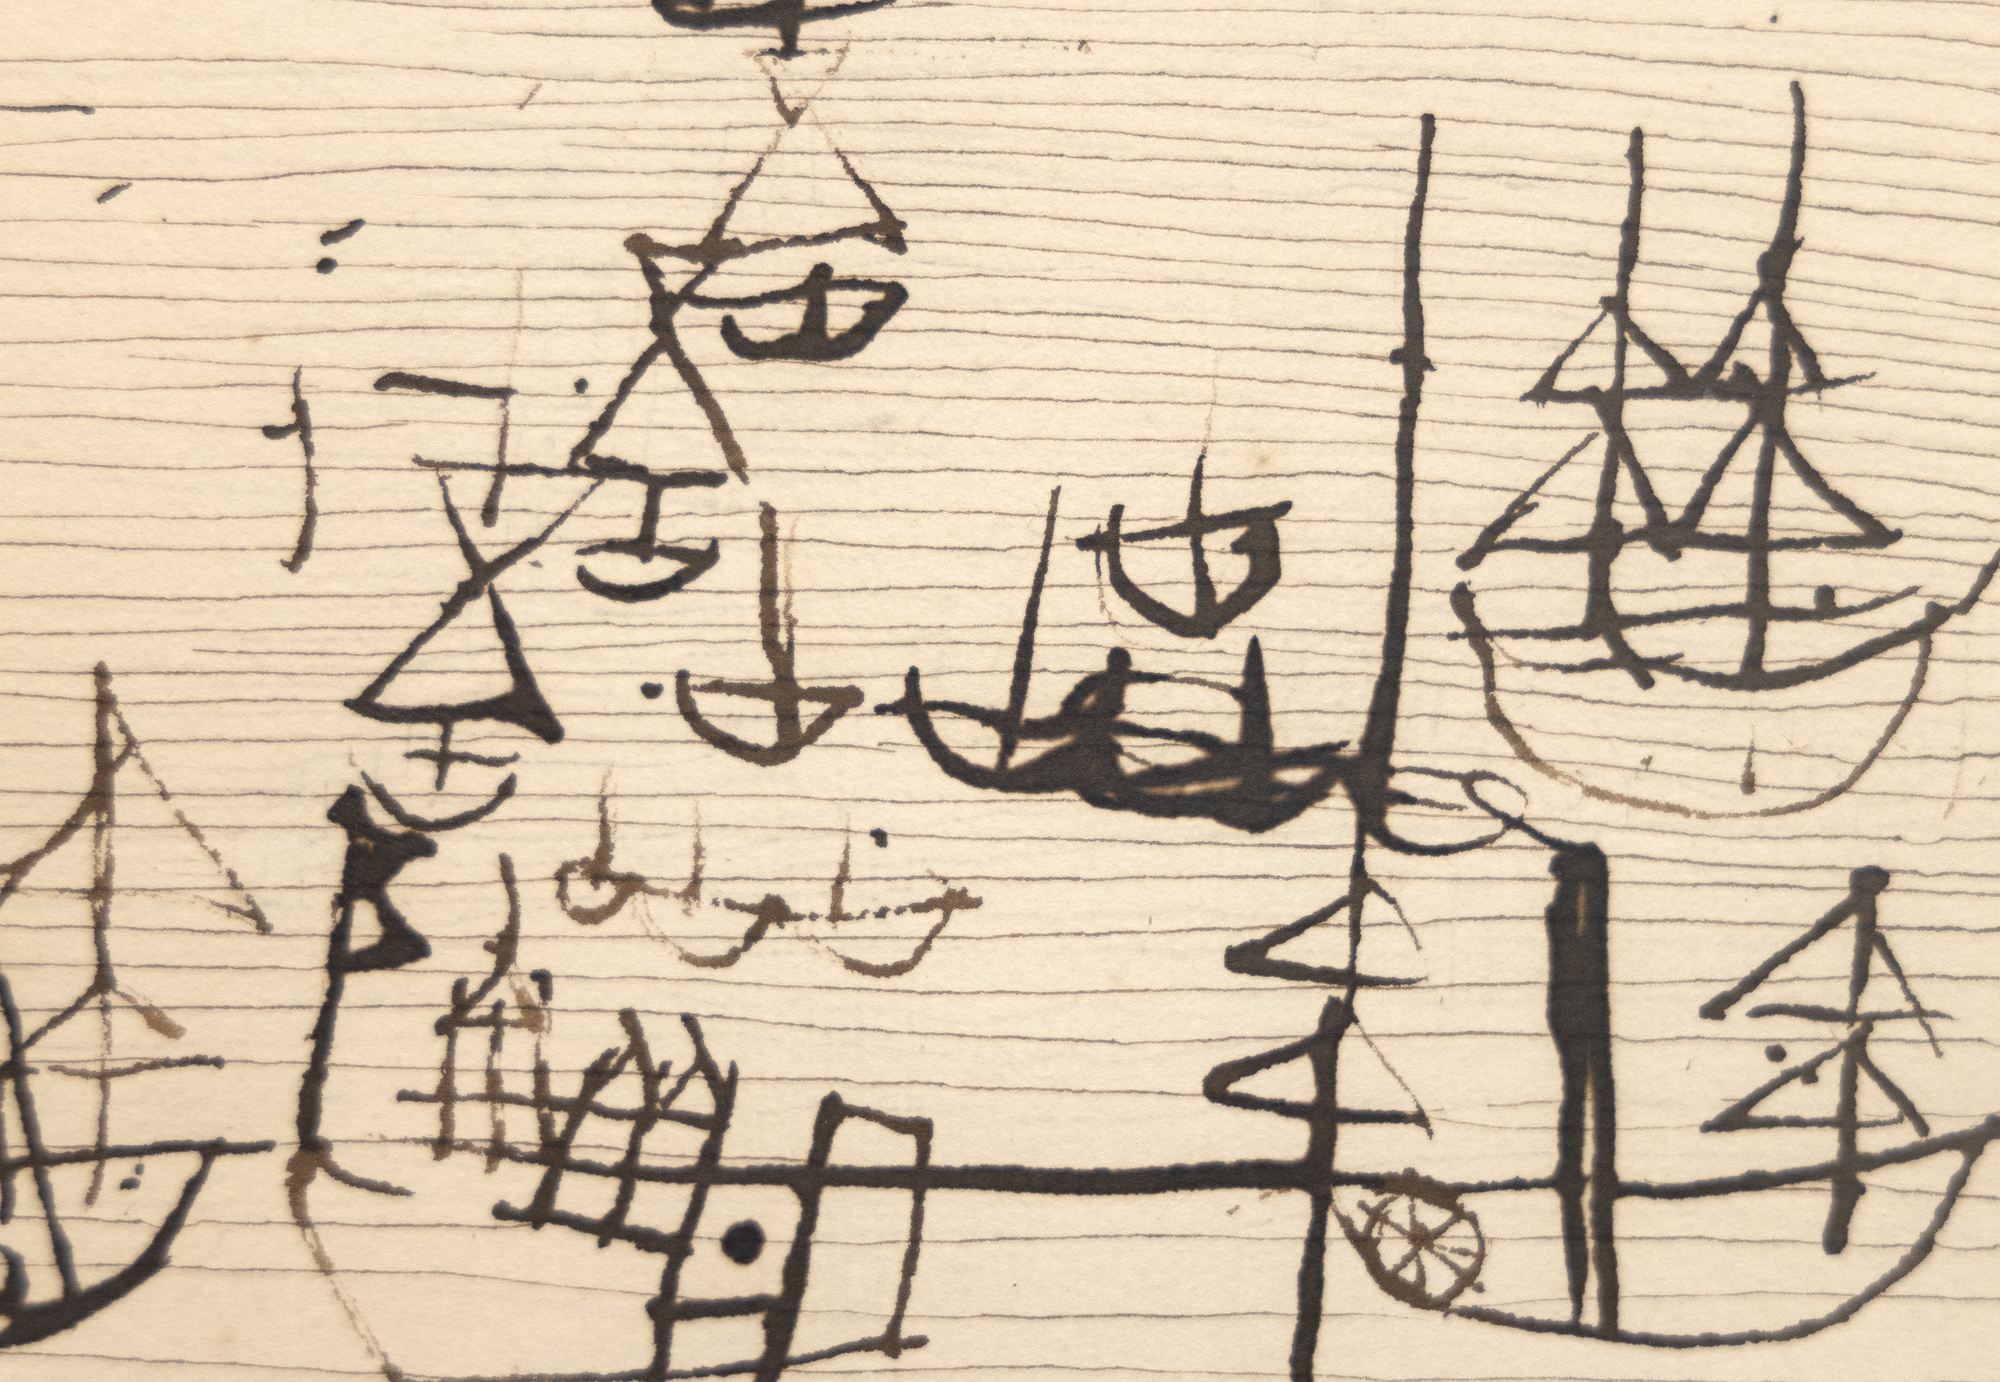 &quot;A drawing is simply a line going for a walk.&quot;&lt;br&gt;-Paul Klee&lt;br&gt;&lt;br&gt;A significant draftsman, Paul Klee&#039;s works on paper rival his works on canvas in their technical proficiency and attention to his modern aesthetic.  As an early teacher at the Bauhaus school, Klee traveled extensively and inspired a generation of 20th Century Artists.  &lt;br&gt;&lt;br&gt;Klee transcended a particular style, instead creating his own unique visual vocabulary.  In Klee&#039;s work, we see a return to basic, geometric forms and a removal of artistic embellishment.  &quot;Der Hafen von Plit&quot; was once owned by Alfred H. Barr, Jr., the First Director of the Museum of Modern Art, New York.